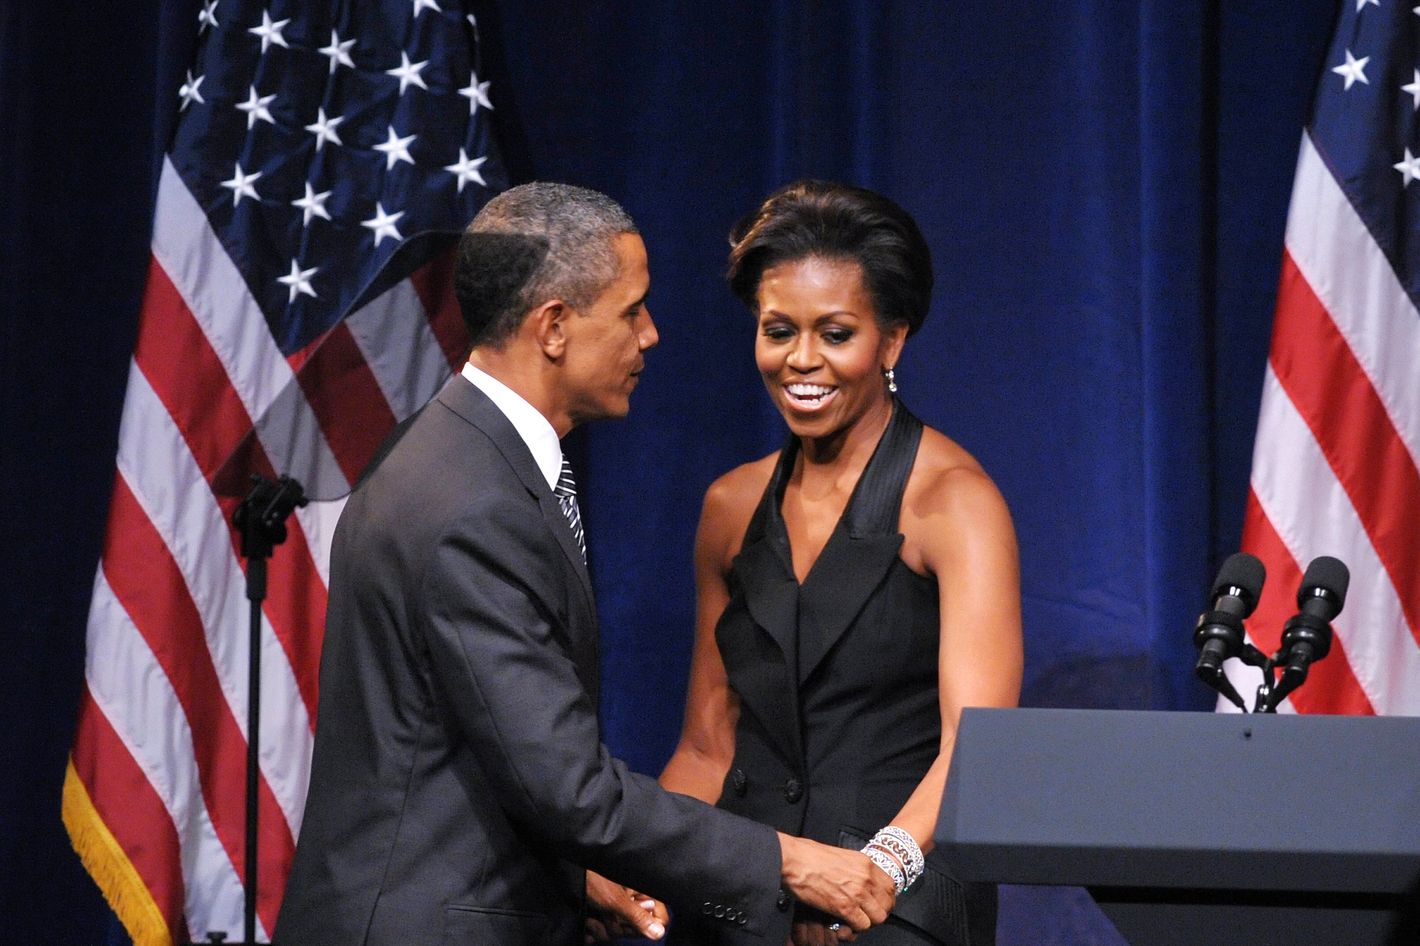 A New Appearance by Michelle Obama's Toned Upper Arms